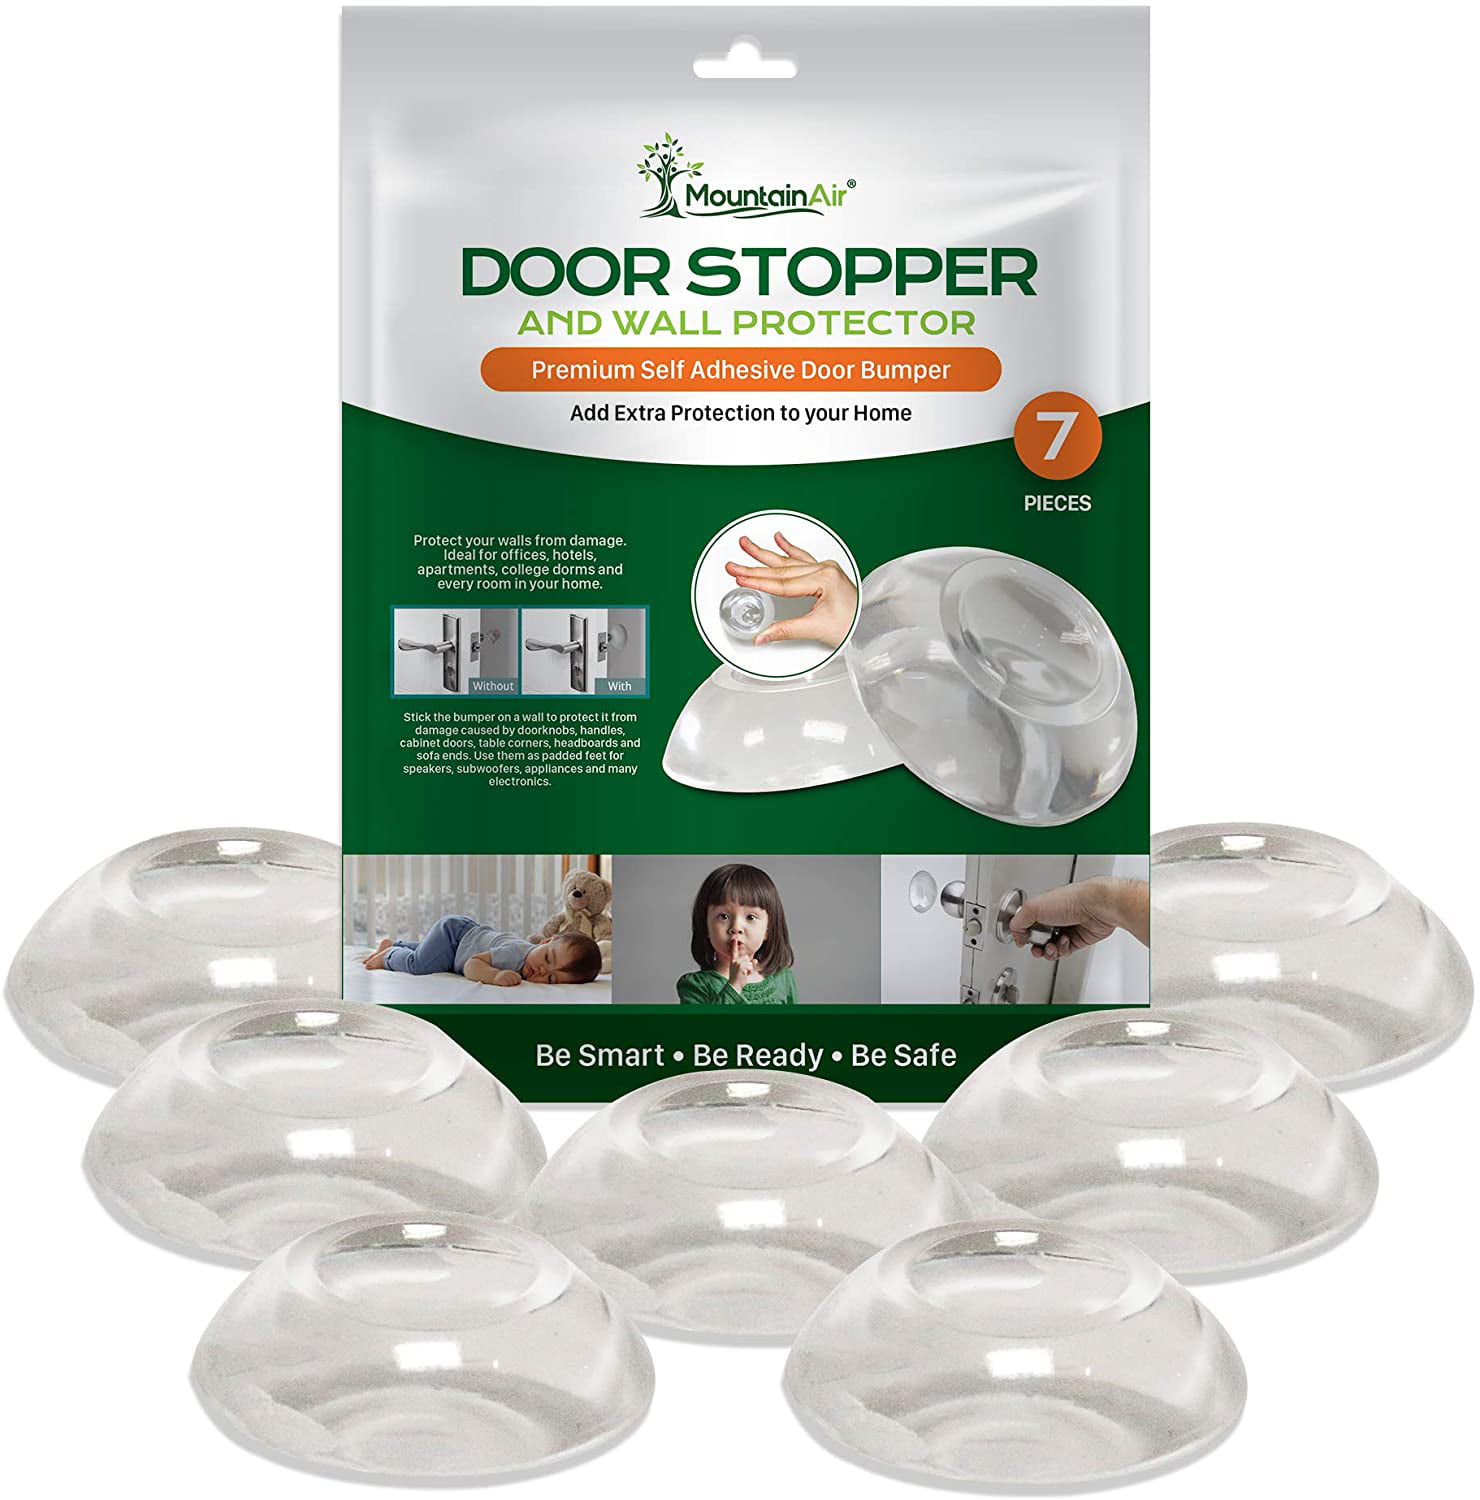 4 PCS Door Stopper Wall Protector 3.3 with Strong 3M Adhesive Quiet and Shock Absorbent Silicone Door Stop Wall Protectors from Door Knobs Larger Door Bumper to Protect Every Wall Surface 